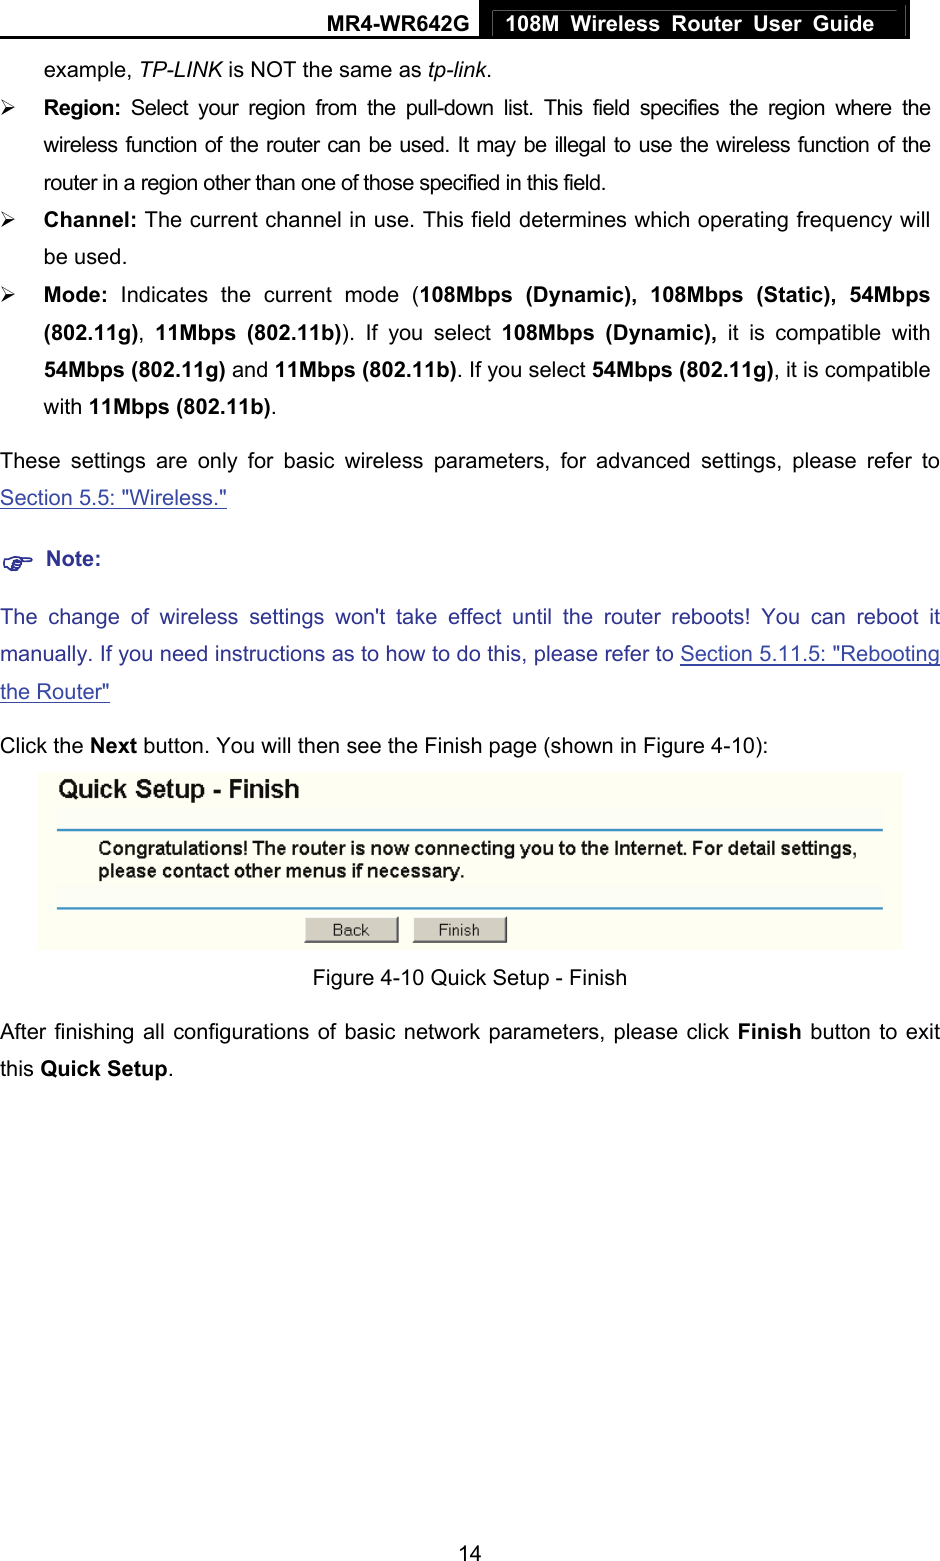 MR4-WR642G 108M Wireless Router User Guide   14example, TP-LINK is NOT the same as tp-link. ¾ Region: Select your region from the pull-down list. This field specifies the region where the wireless function of the router can be used. It may be illegal to use the wireless function of the router in a region other than one of those specified in this field. ¾ Channel: The current channel in use. This field determines which operating frequency will be used. ¾ Mode: Indicates the current mode (108Mbps (Dynamic), 108Mbps (Static), 54Mbps (802.11g),  11Mbps (802.11b)). If you select 108Mbps (Dynamic), it is compatible with 54Mbps (802.11g) and 11Mbps (802.11b). If you select 54Mbps (802.11g), it is compatible with 11Mbps (802.11b). These settings are only for basic wireless parameters, for advanced settings, please refer to Section 5.5: &quot;Wireless.&quot;  ) Note: The change of wireless settings won&apos;t take effect until the router reboots! You can reboot it manually. If you need instructions as to how to do this, please refer to Section 5.11.5: &quot;Rebooting the Router&quot; Click the Next button. You will then see the Finish page (shown in Figure 4-10):  Figure 4-10 Quick Setup - Finish After finishing all configurations of basic network parameters, please click Finish button to exit this Quick Setup. 